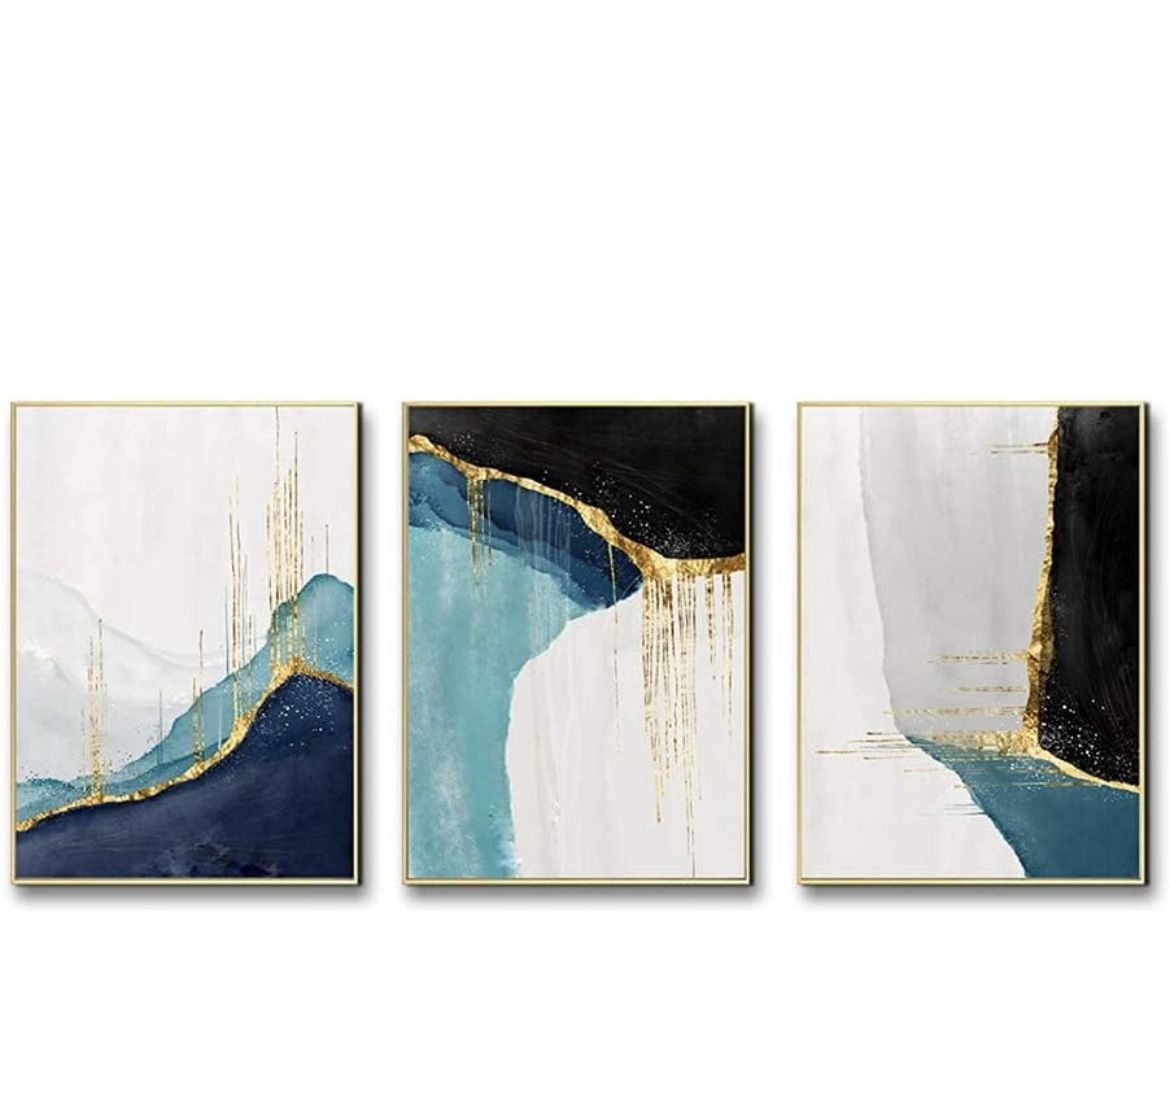  Abstract Art in Navy Blue and Gold Canvas Print Wall Art with Gold Foil